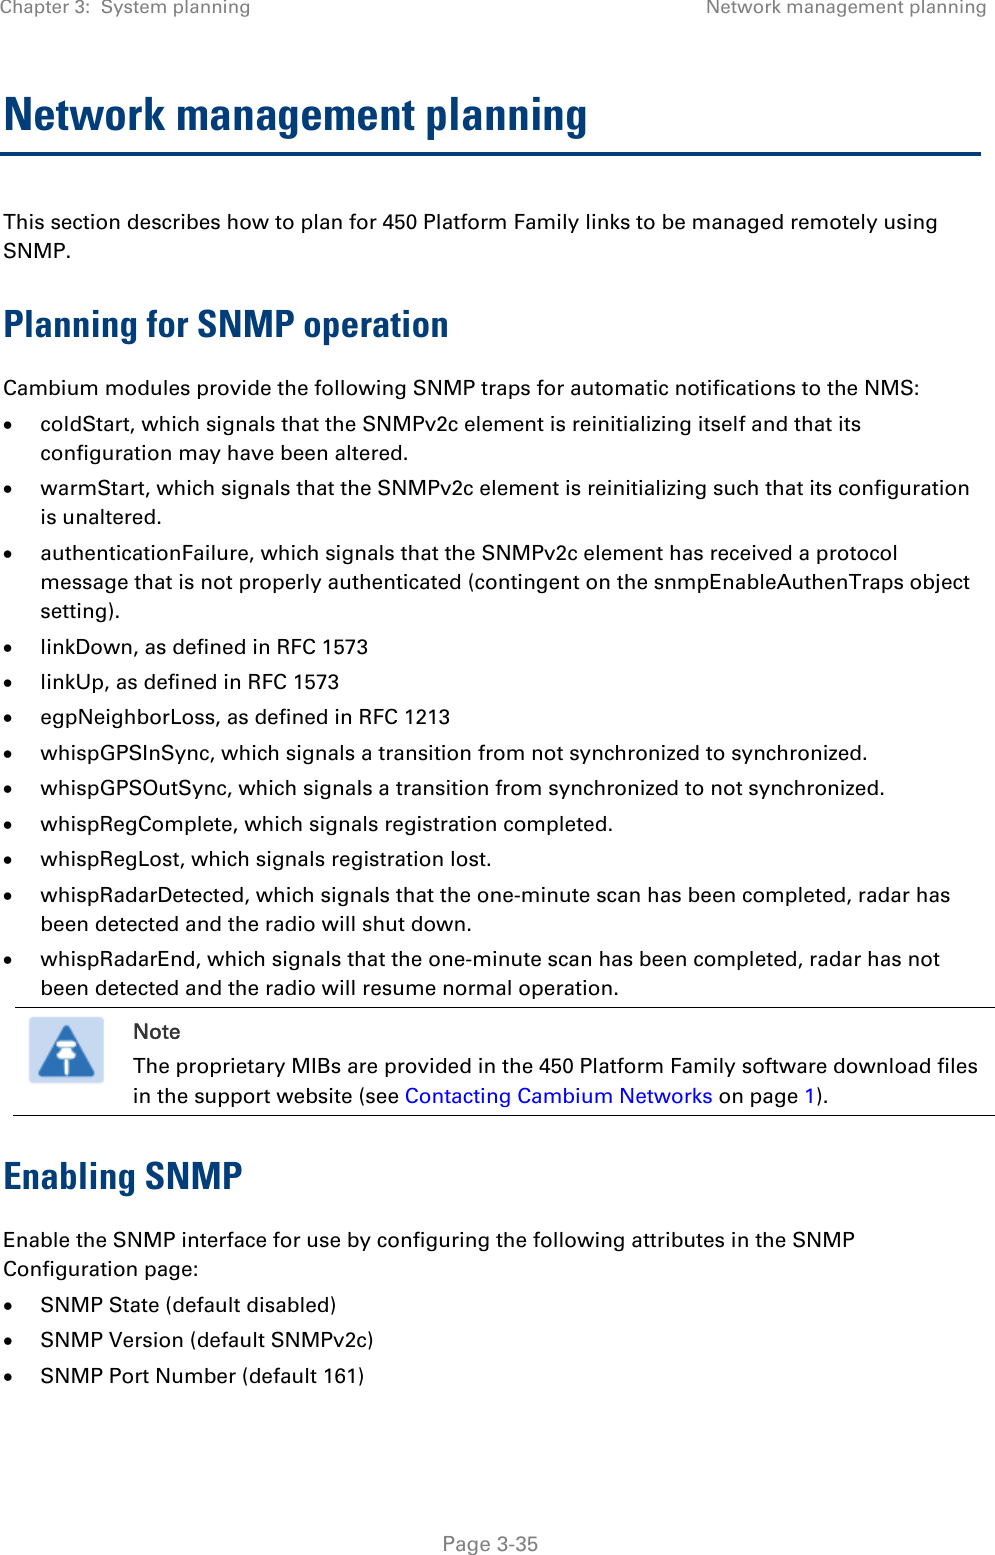 Chapter 3:  System planning  Network management planning   Page 3-35 Network management planning This section describes how to plan for 450 Platform Family links to be managed remotely using SNMP. Planning for SNMP operation Cambium modules provide the following SNMP traps for automatic notifications to the NMS:  coldStart, which signals that the SNMPv2c element is reinitializing itself and that its configuration may have been altered.  warmStart, which signals that the SNMPv2c element is reinitializing such that its configuration is unaltered.  authenticationFailure, which signals that the SNMPv2c element has received a protocol message that is not properly authenticated (contingent on the snmpEnableAuthenTraps object setting).  linkDown, as defined in RFC 1573  linkUp, as defined in RFC 1573  egpNeighborLoss, as defined in RFC 1213  whispGPSInSync, which signals a transition from not synchronized to synchronized.  whispGPSOutSync, which signals a transition from synchronized to not synchronized.  whispRegComplete, which signals registration completed.   whispRegLost, which signals registration lost.   whispRadarDetected, which signals that the one-minute scan has been completed, radar has been detected and the radio will shut down.   whispRadarEnd, which signals that the one-minute scan has been completed, radar has not been detected and the radio will resume normal operation.   Note The proprietary MIBs are provided in the 450 Platform Family software download files in the support website (see Contacting Cambium Networks on page 1). Enabling SNMP Enable the SNMP interface for use by configuring the following attributes in the SNMP Configuration page:  SNMP State (default disabled)  SNMP Version (default SNMPv2c)  SNMP Port Number (default 161) 